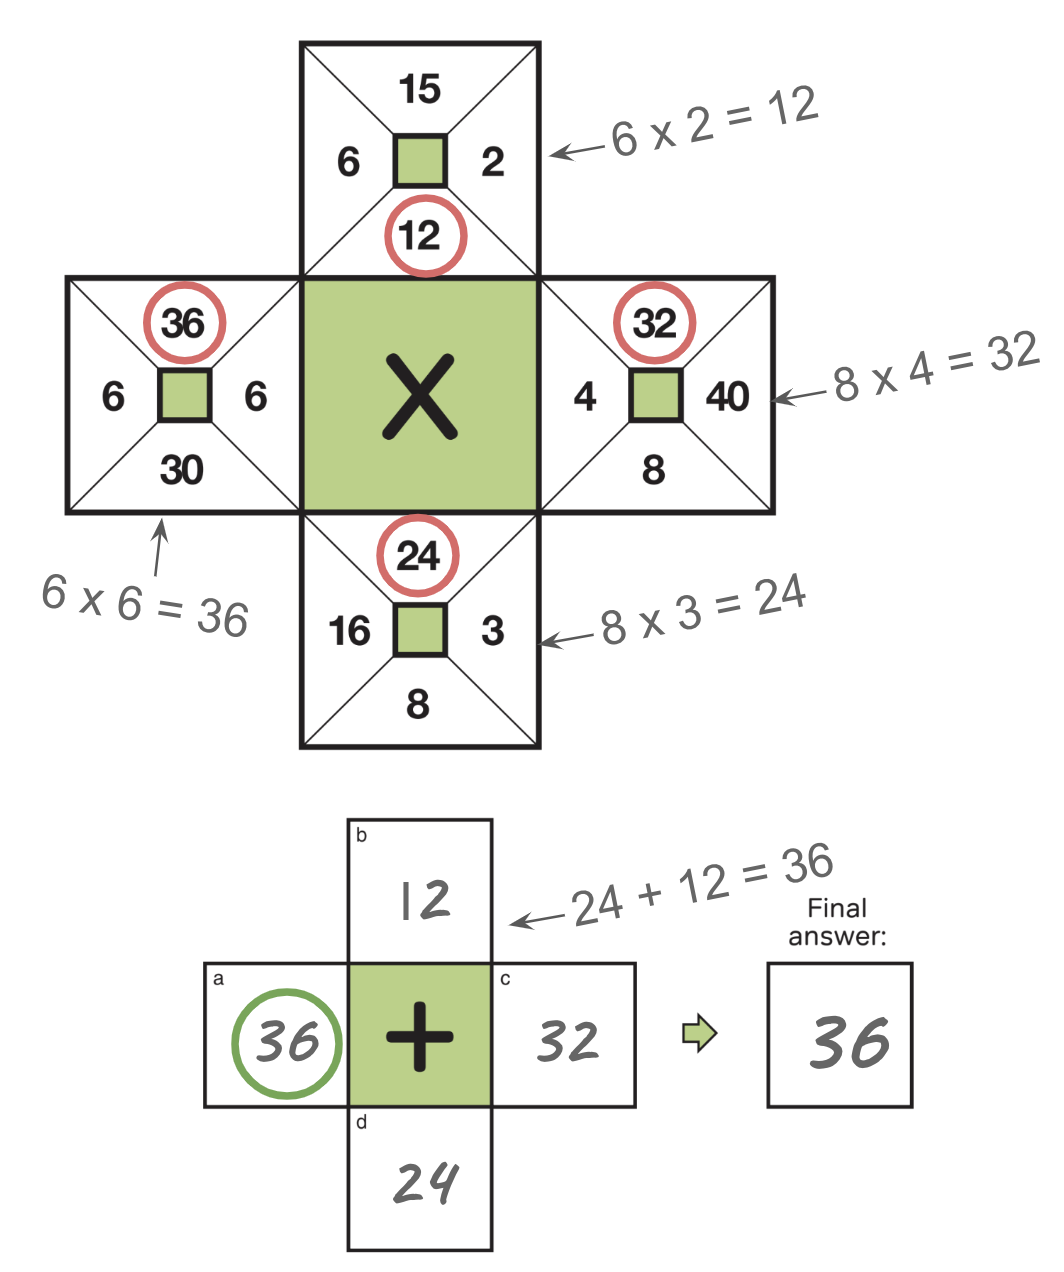 A completed example of a two-part multiplication kakooma puzzle. The first part has four square sections containing four numbers each. The left section containing 6, 6, 30, and 36 is labelled with the solution 6x6=36 and its number 36 circled in red. The top section containing 2, 6, 12, and 15 is labelled with the solution 6x2=12 and its number 12 circled in red. The right section containing 4, 8, 32, and 40 is labelled with the solution 8x4=32 and its number 32 circled in red. The bottom section containing 3, 8, 16, and 24 is labelled with the solution 8x3=24 and its number 24 circled in red. The second part of the puzzle is made of four boxes containing 12, 24, 32, and 36. It is labelled with the solution 24+12=36 and its number 36 circled in green. The final answer box contains the number 36.